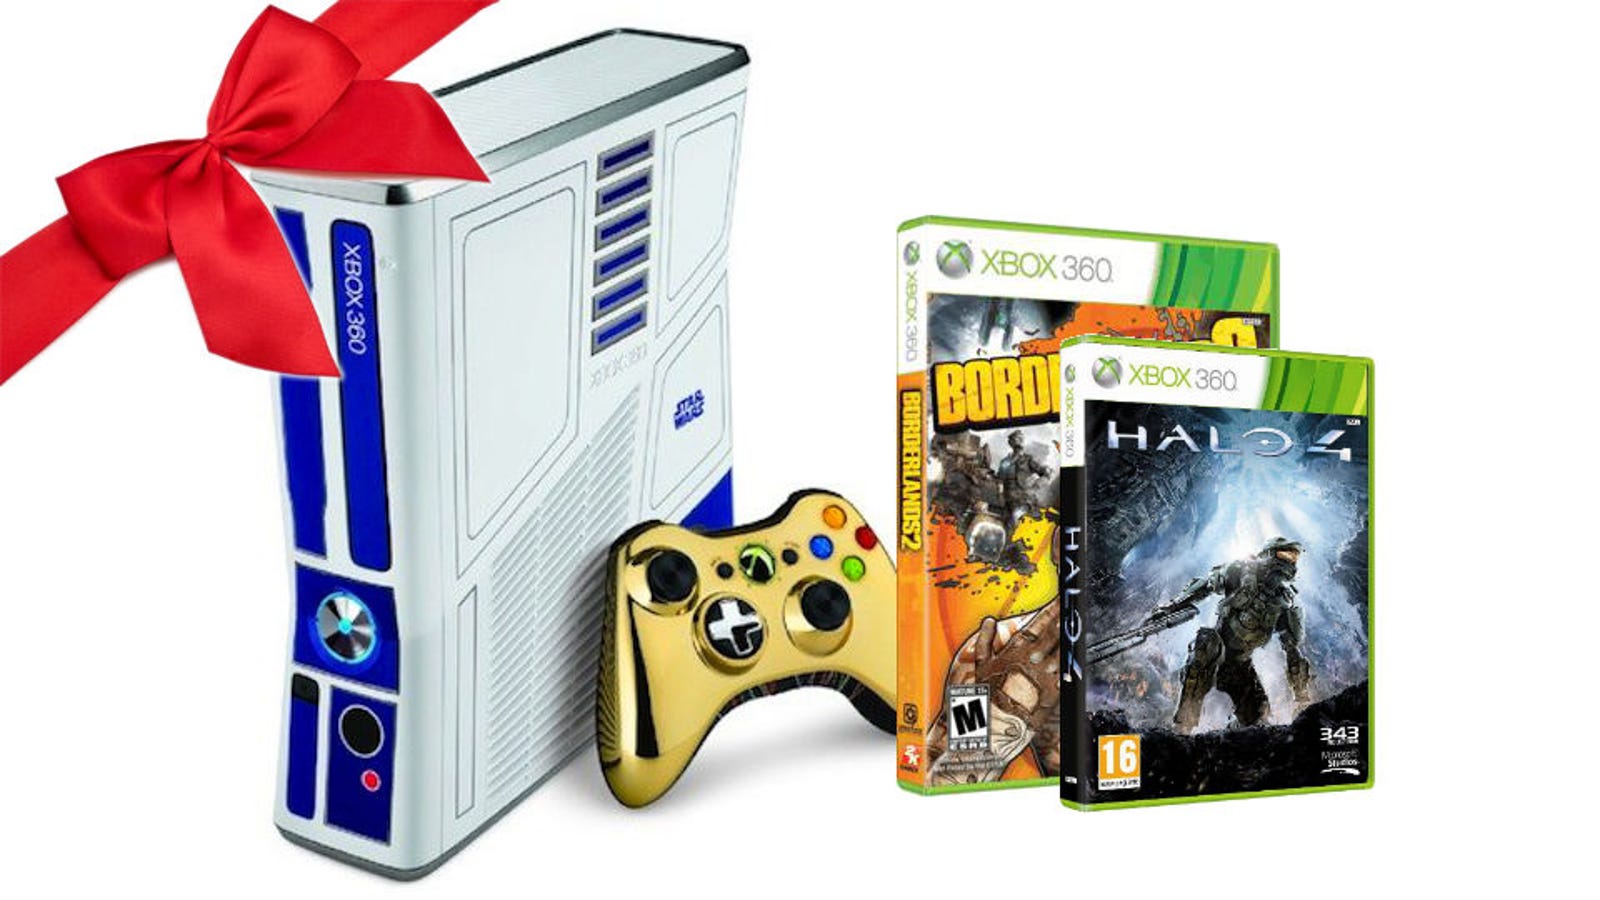 Holiday Gift Guide What Do You Buy The Xbox Gamer?